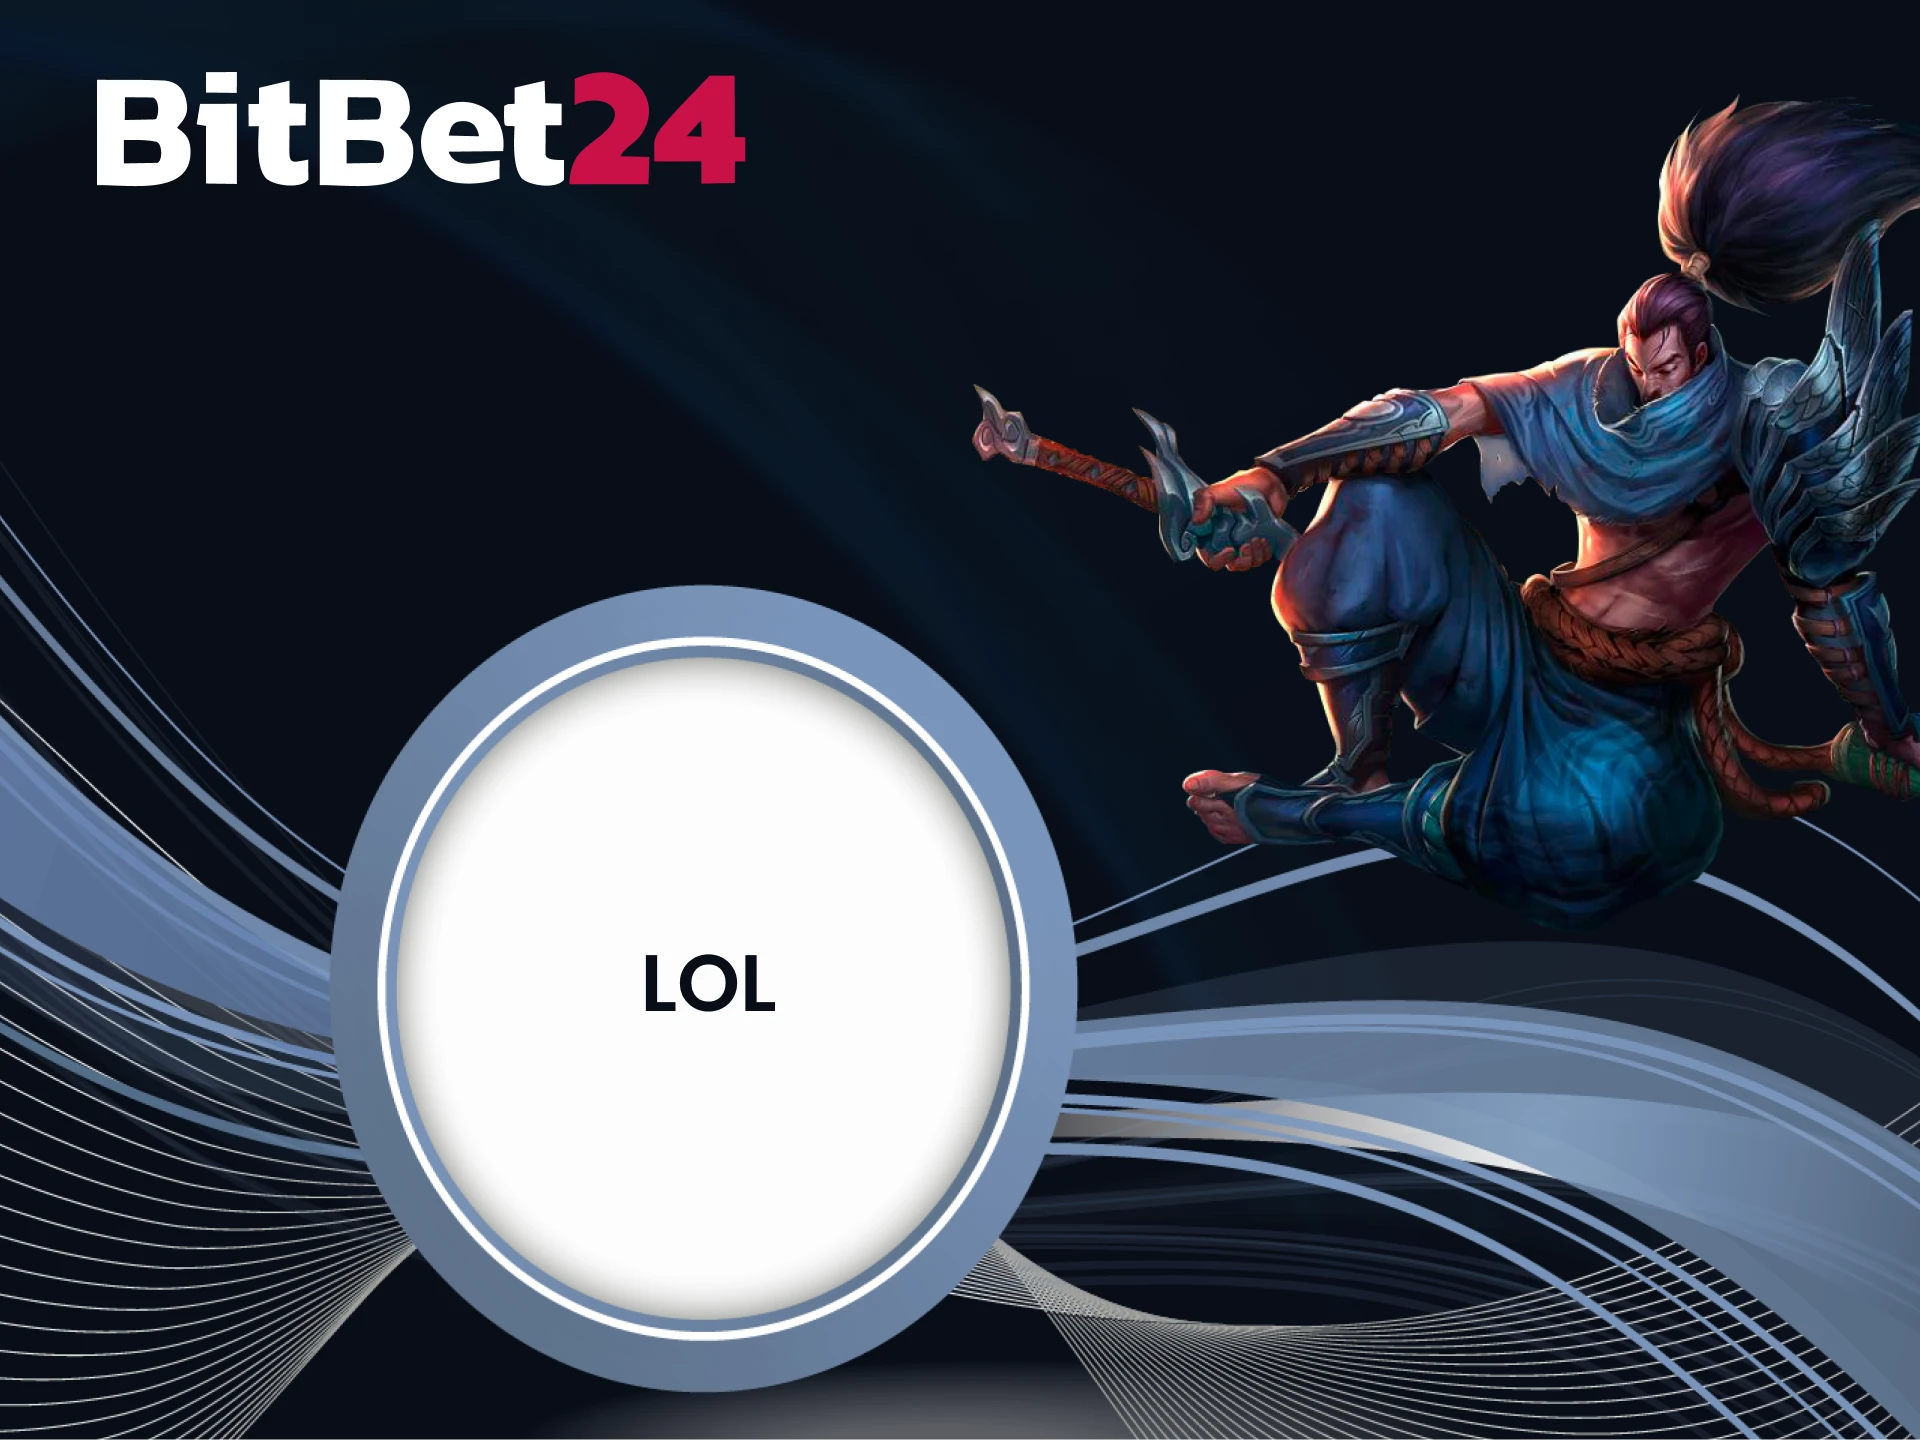 Place your bets on League of Legends at BitBet24.